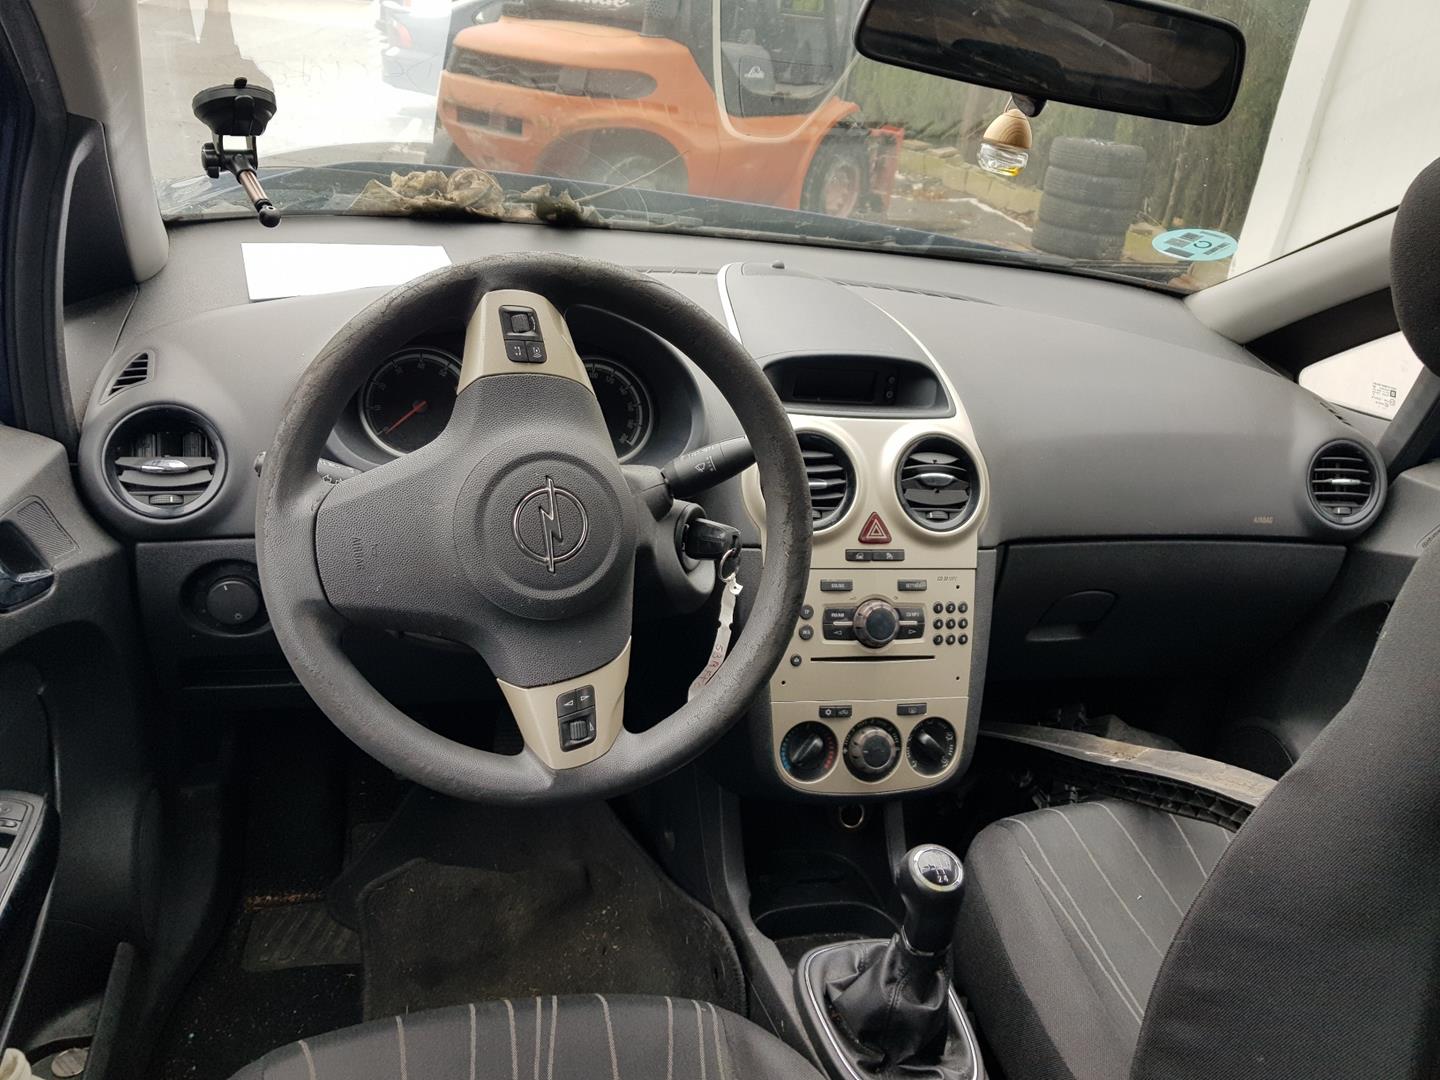 OPEL Corsa D (2006-2020) Other Interior Parts 13209460, 565412769 23631511